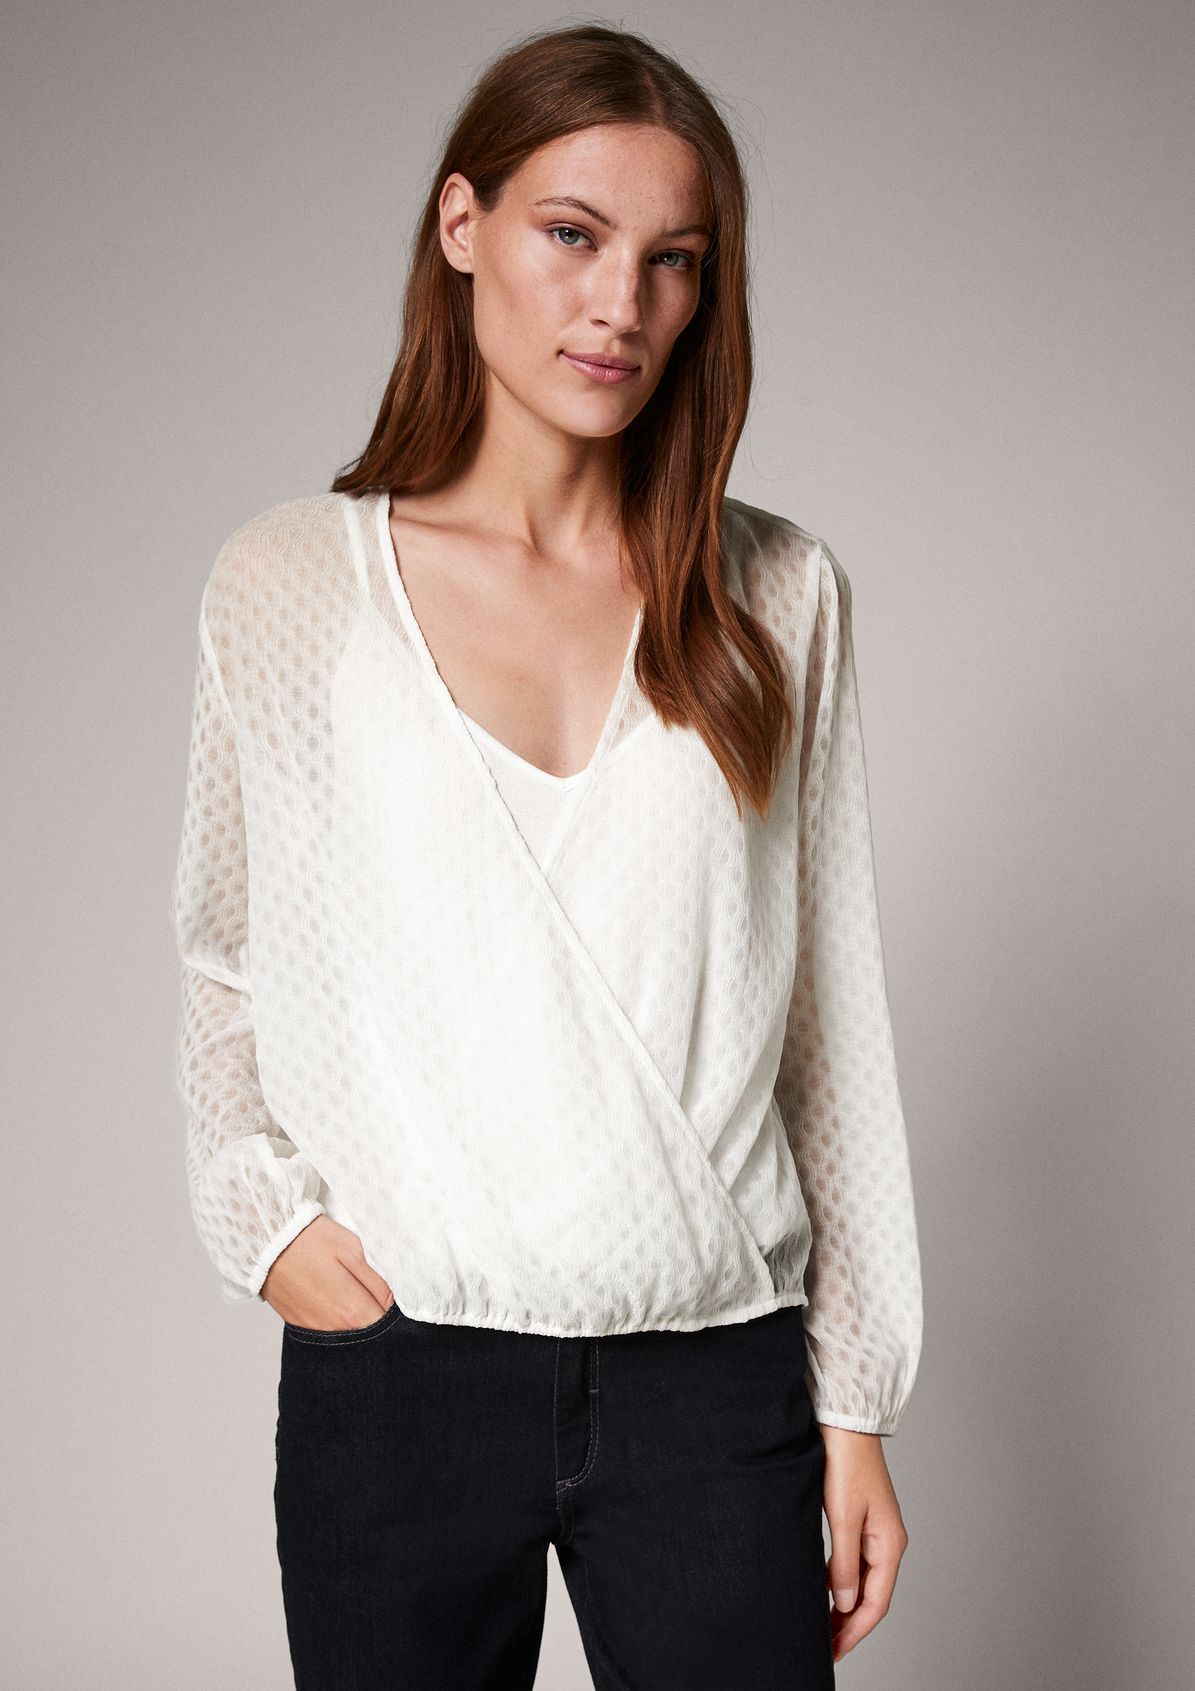 Sheer blouse with strappy top from comma